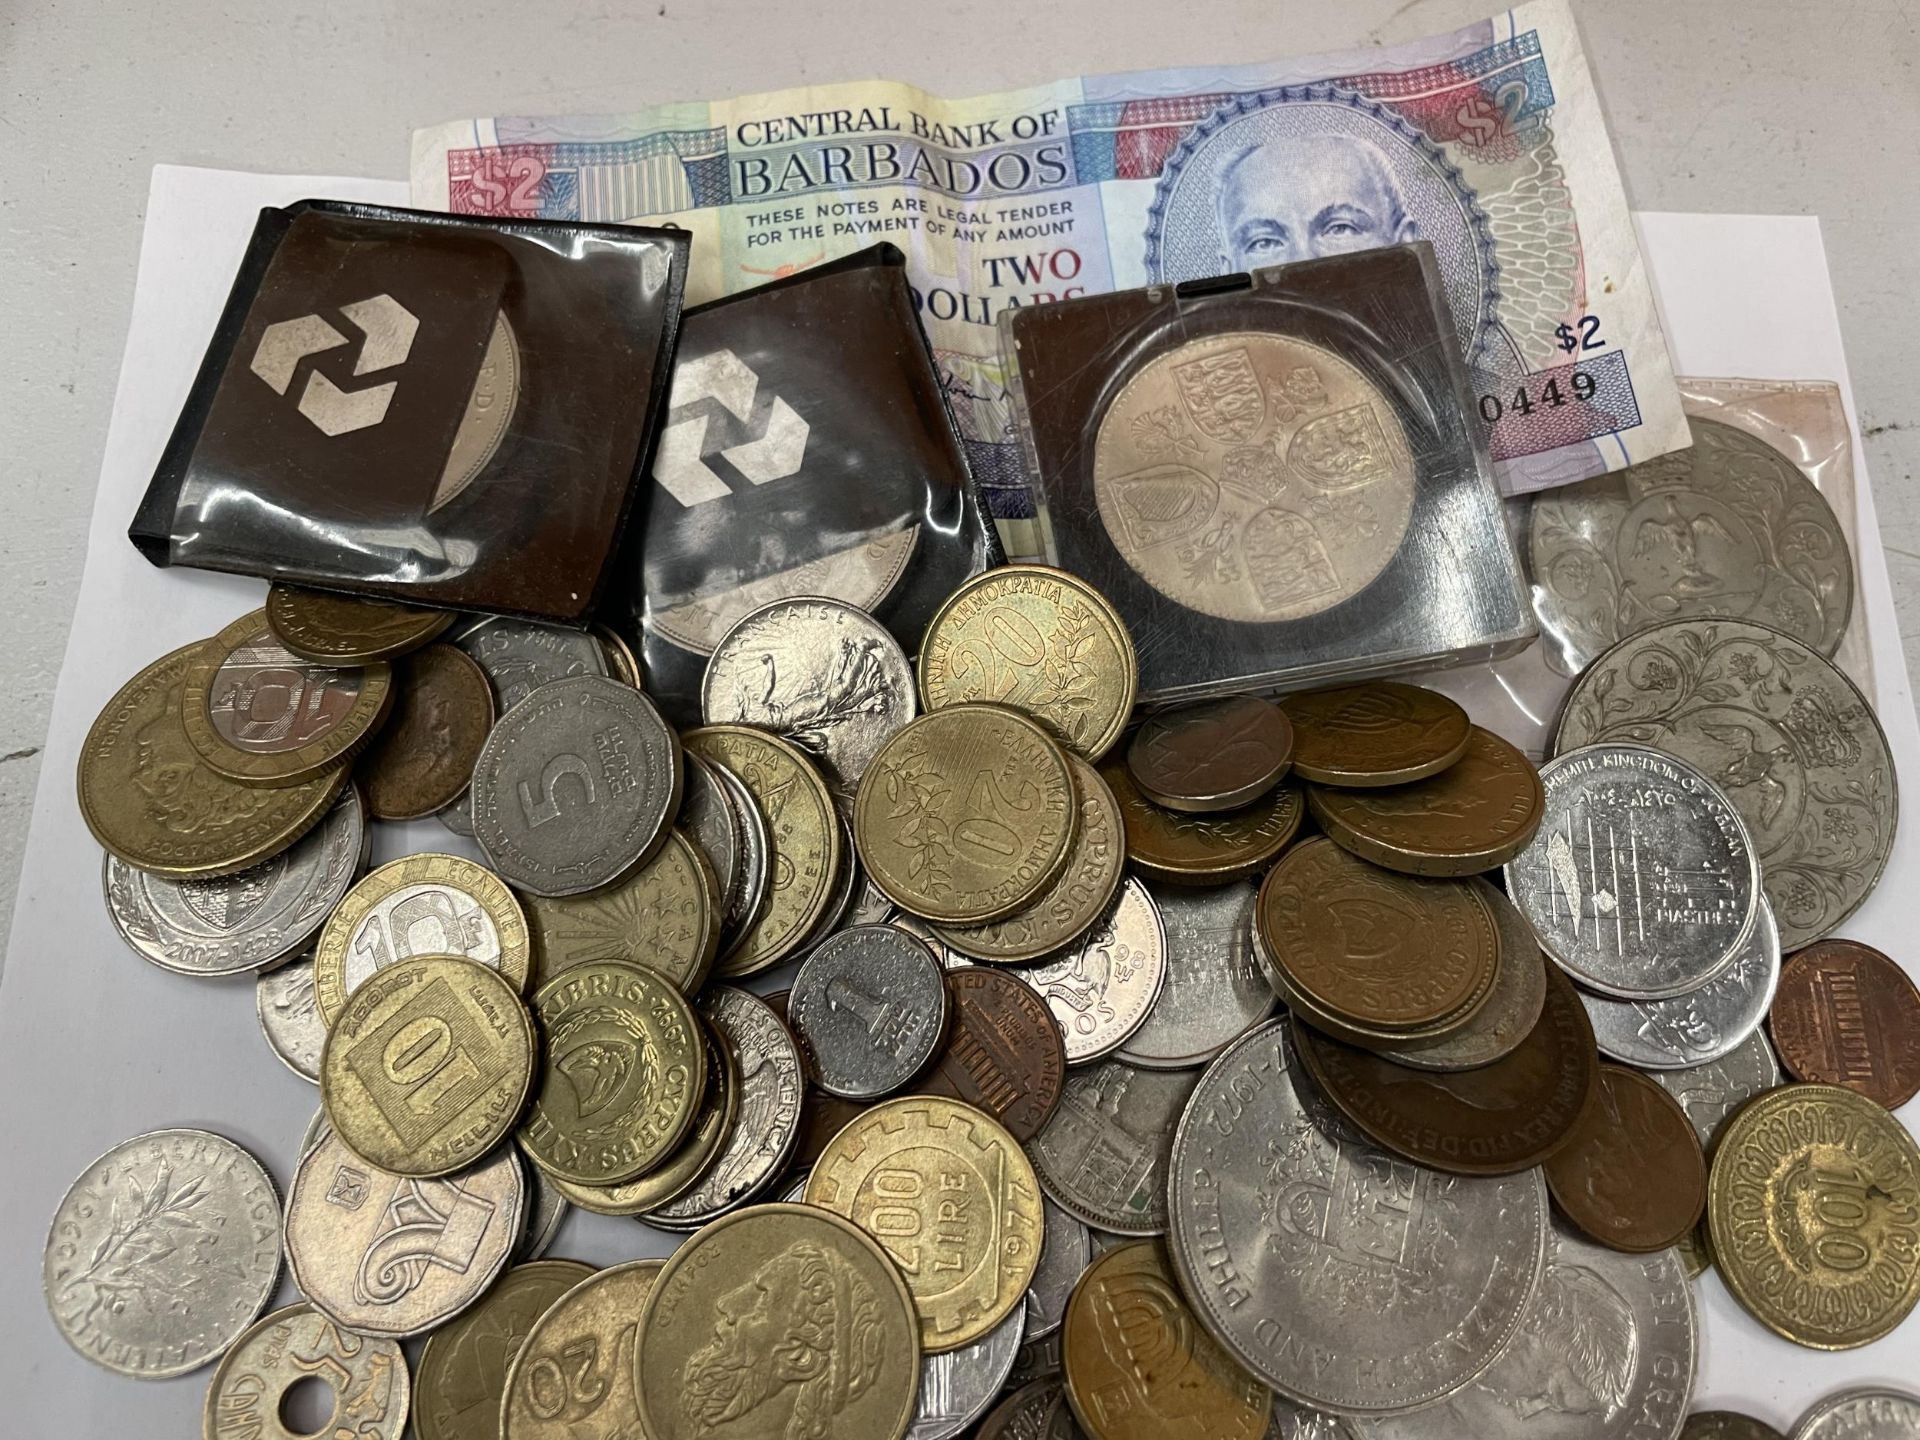 A LARGE QUANTITY OF VARIOUS COINS AND NOTES - Image 2 of 4